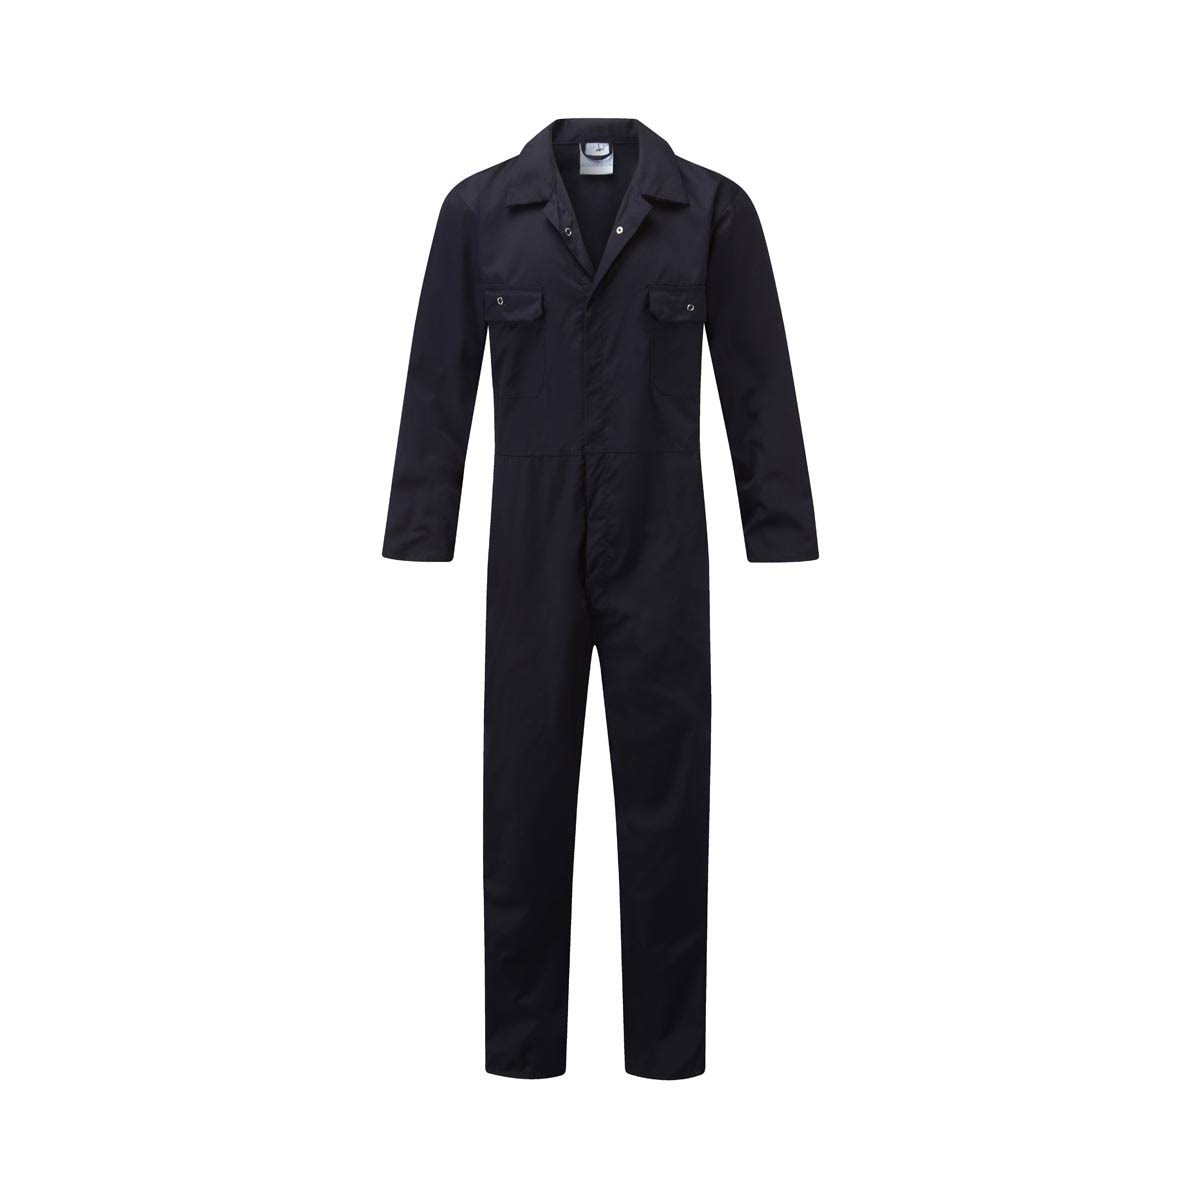 Fort 318-NVY-XL 318 Workforce Coverall Navy Blue - XL | By Toolden